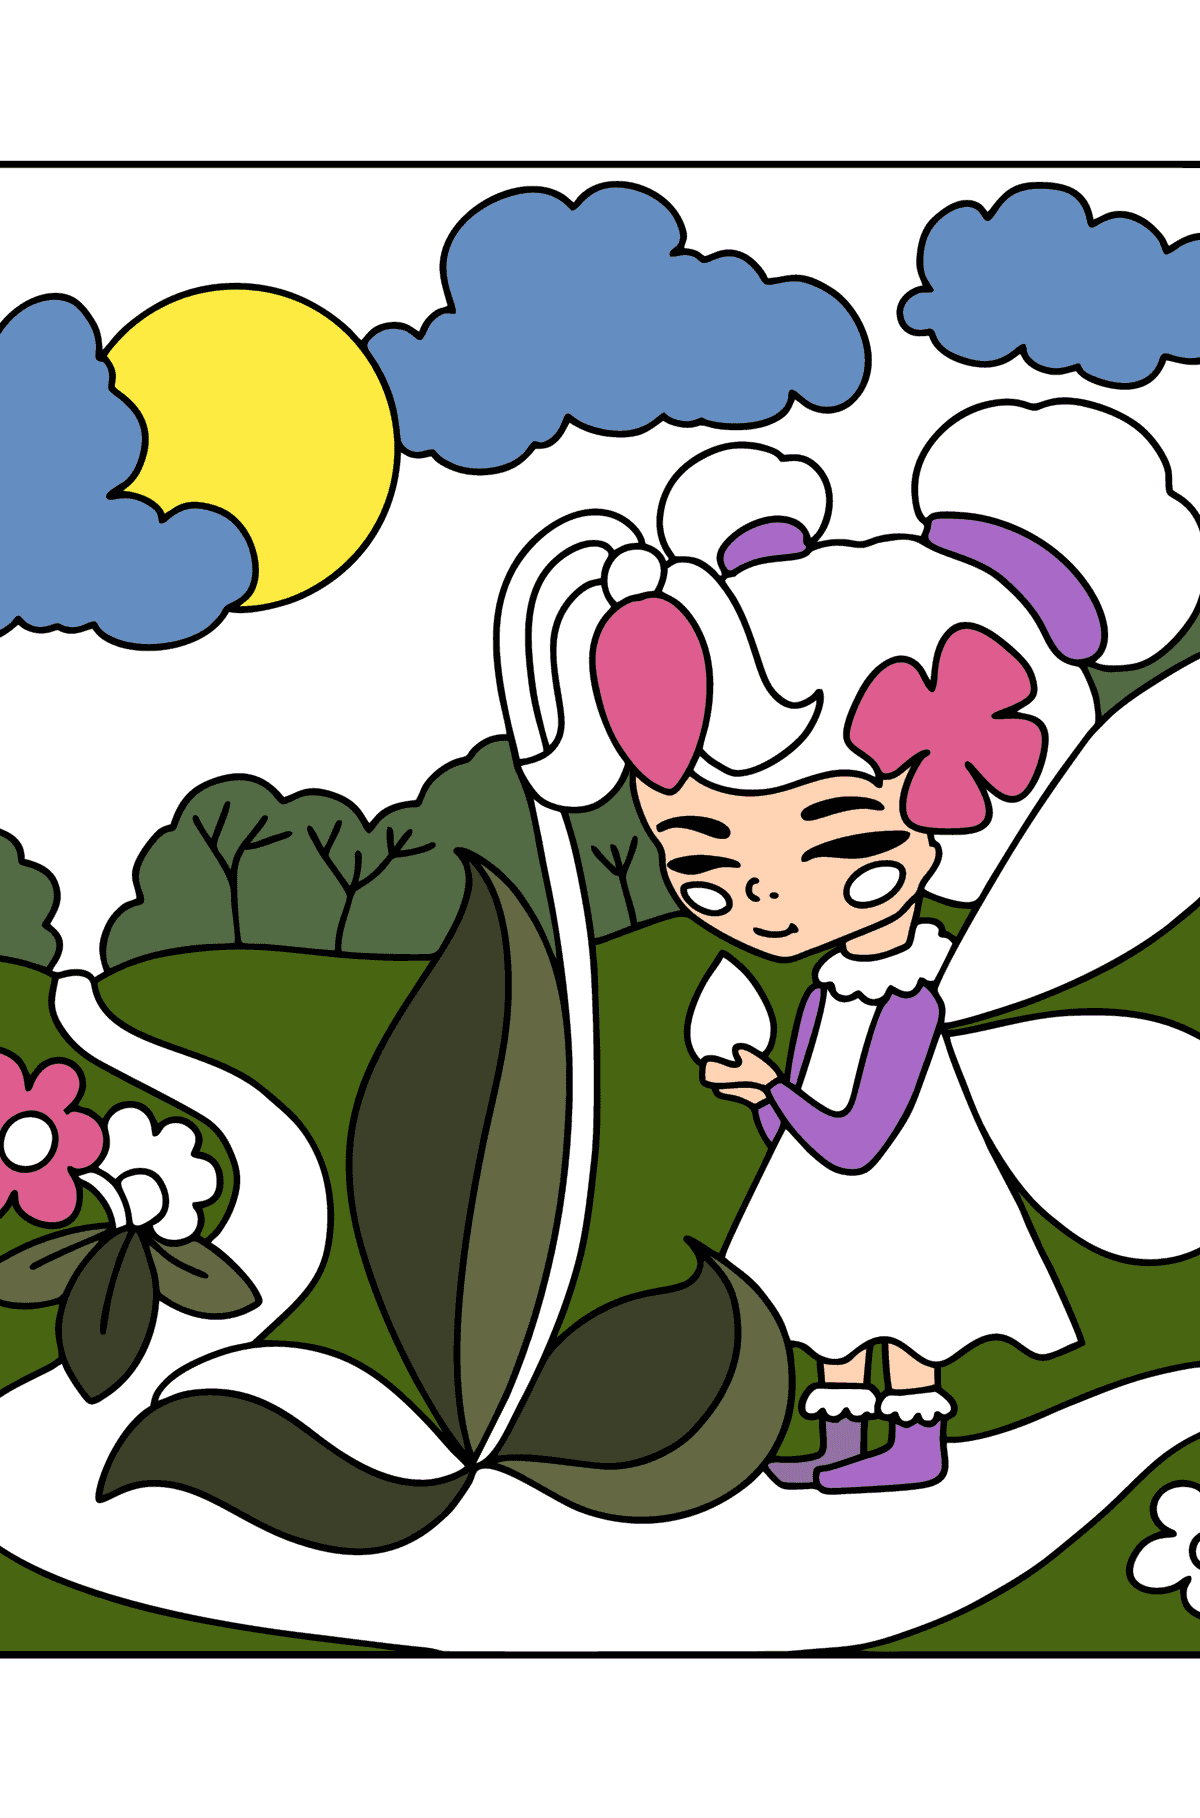 Fairy on a forest path coloring page - Coloring Pages for Kids